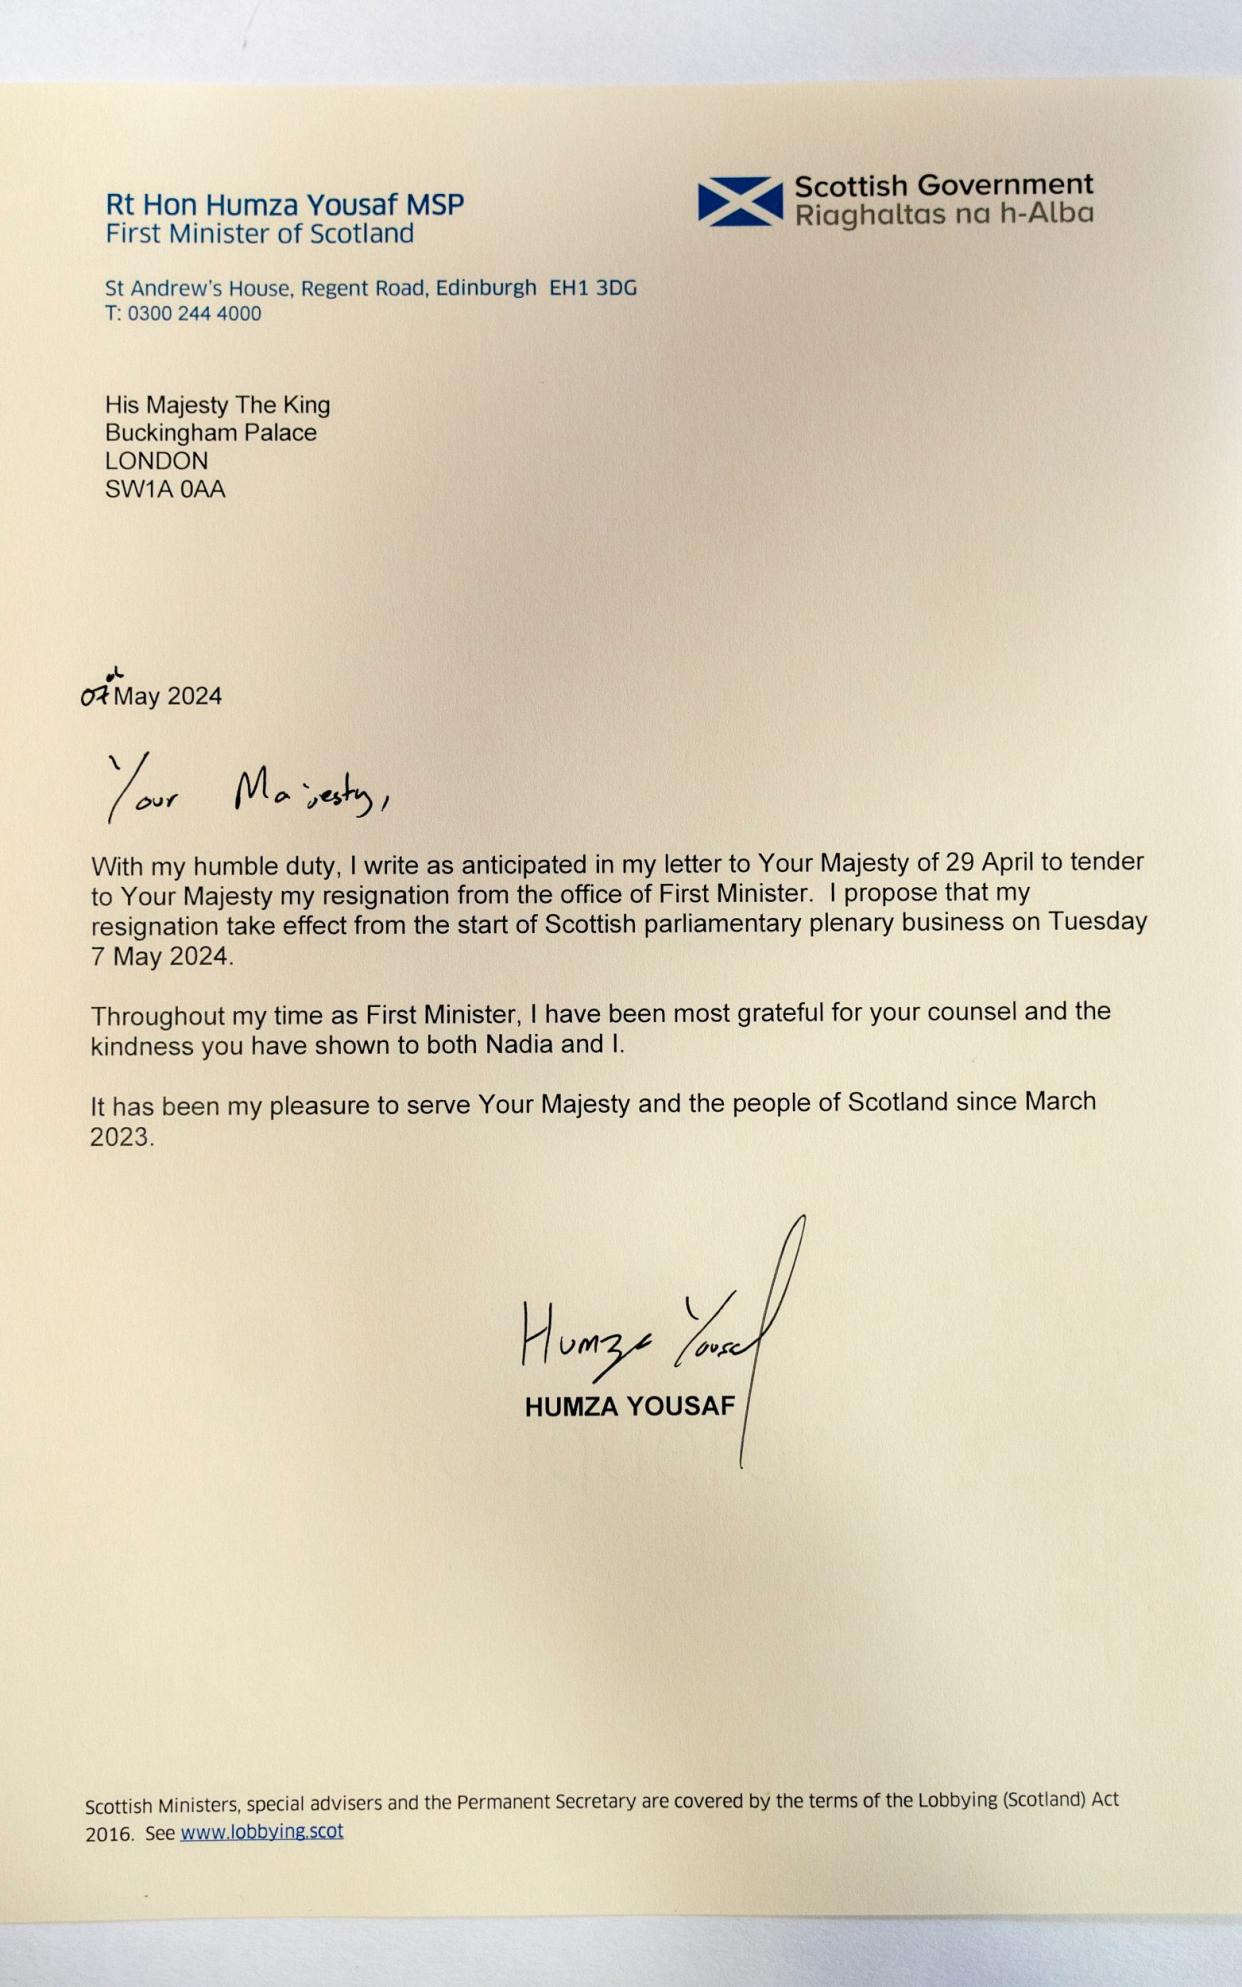 Humza Yousaf's letter of resignation to the King